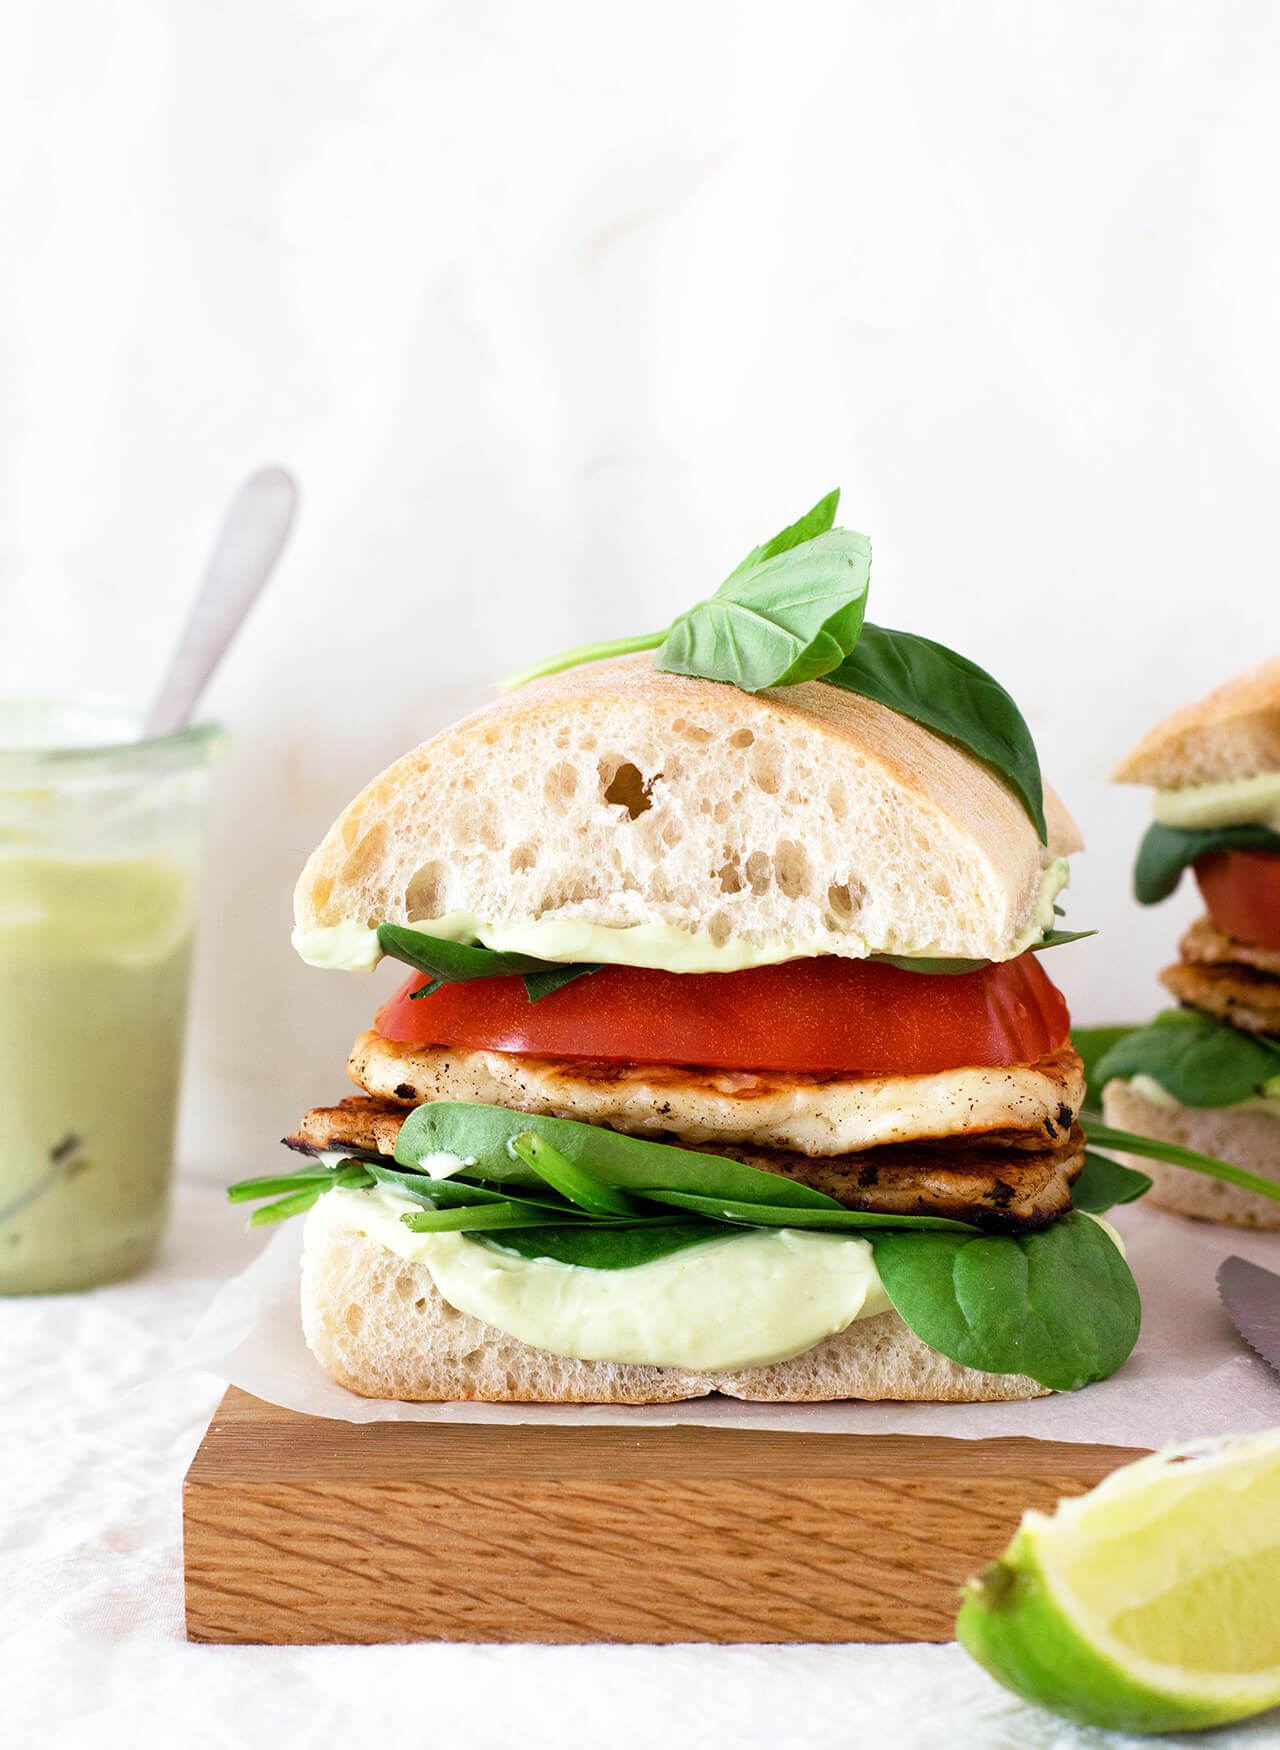 Avocado crema halloumi sandwich makes the perfect vegetarian lunch or dinner, packed with greens and made quickly.